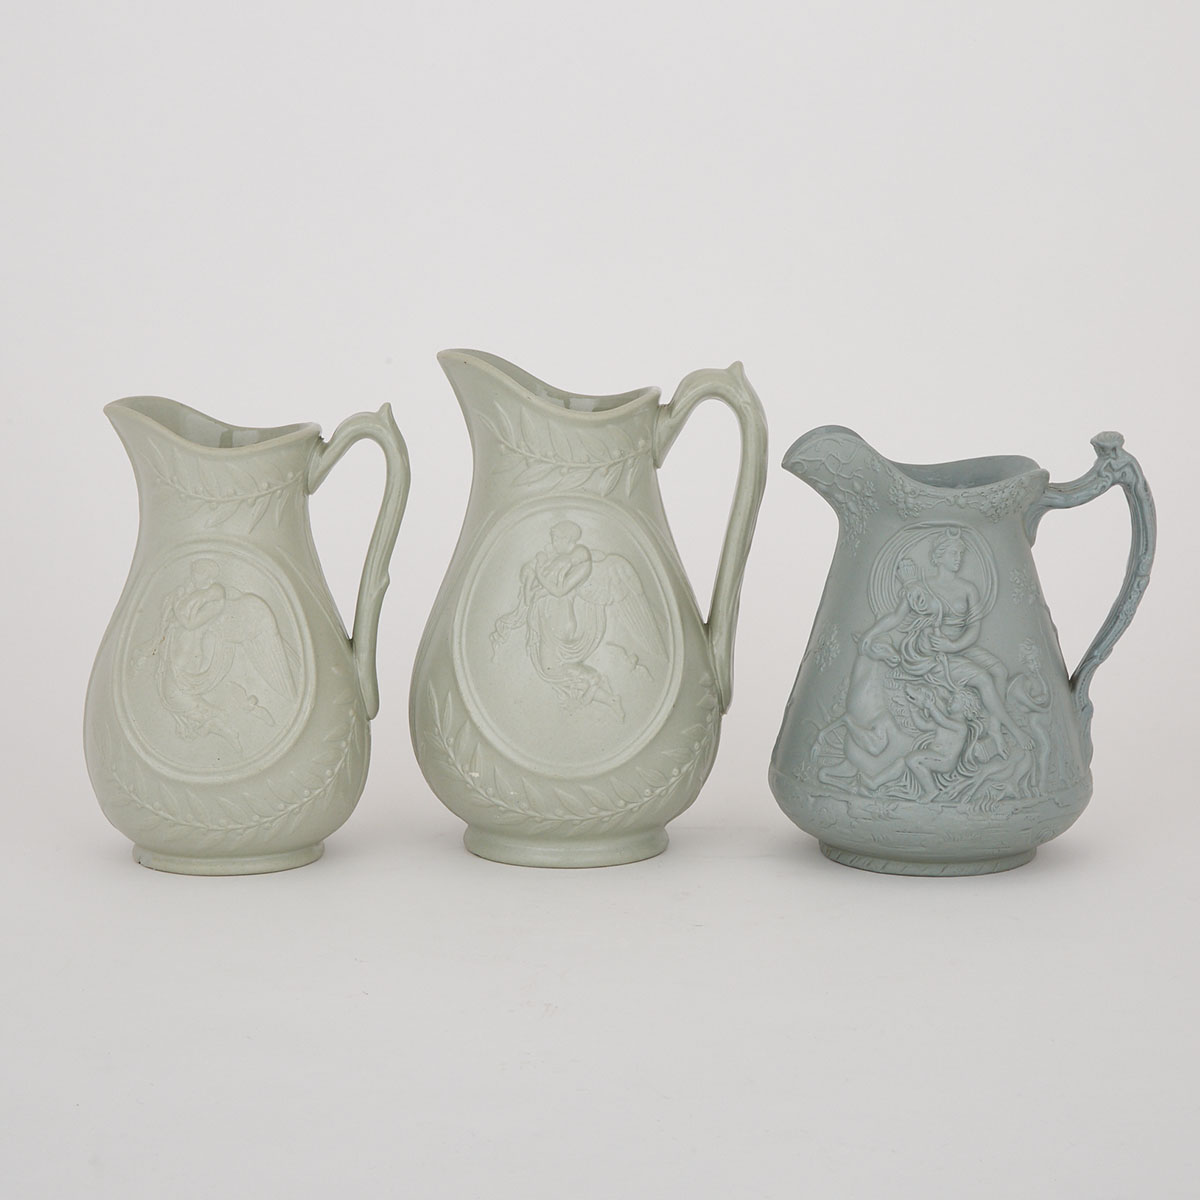 Three English Moulded Stoneware Jugs, late 19th century